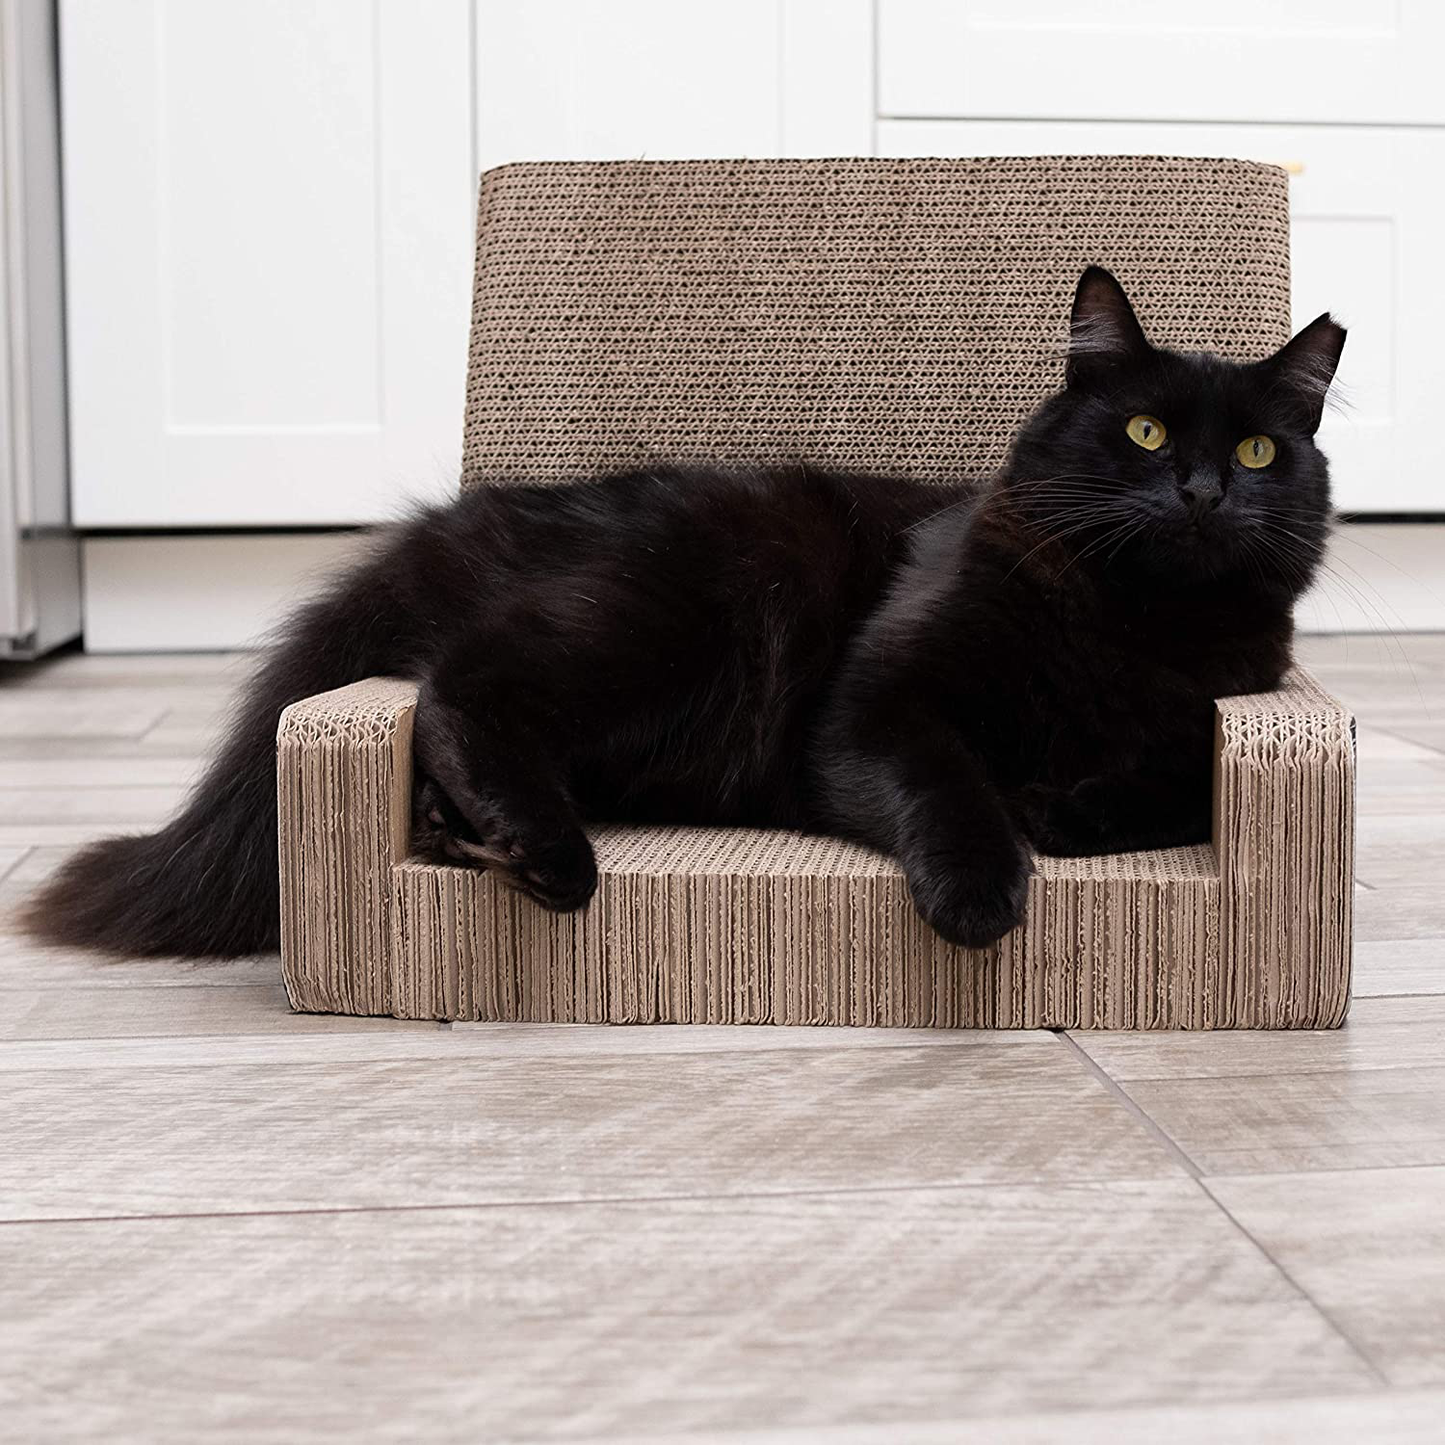 PURRFECT POUCH Luxe Cat Lounger and Cat Scratcher Toy Made of Extra Think Extra Corrugated Cardboard, Reversible for 2X the Scratching (Catnip Included)